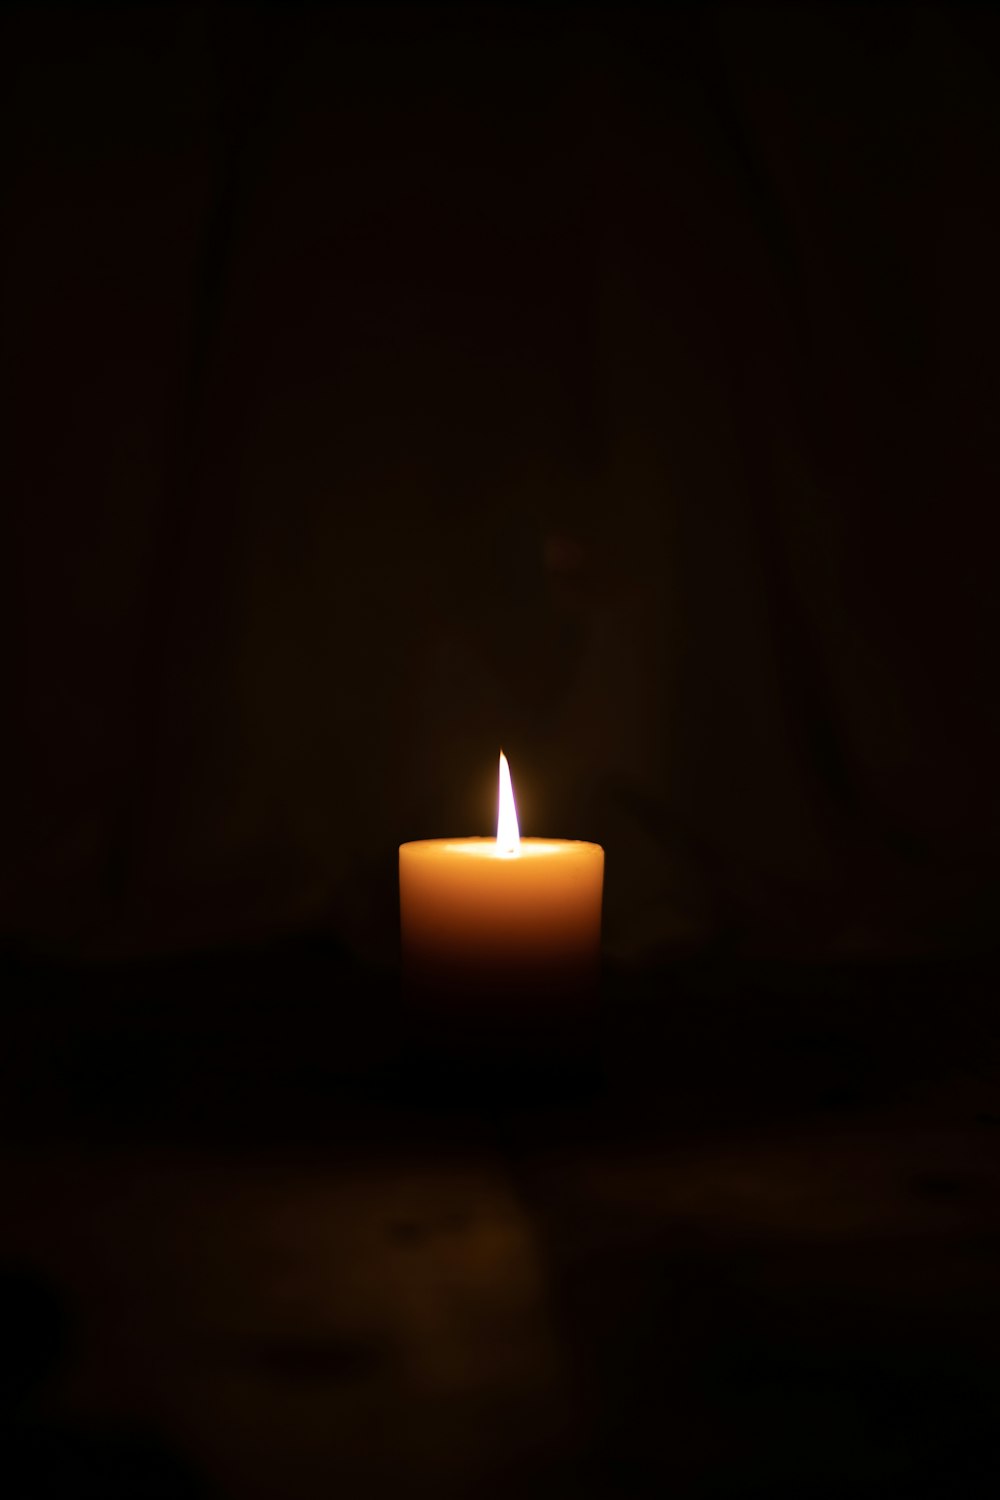 lighted candle in dark room